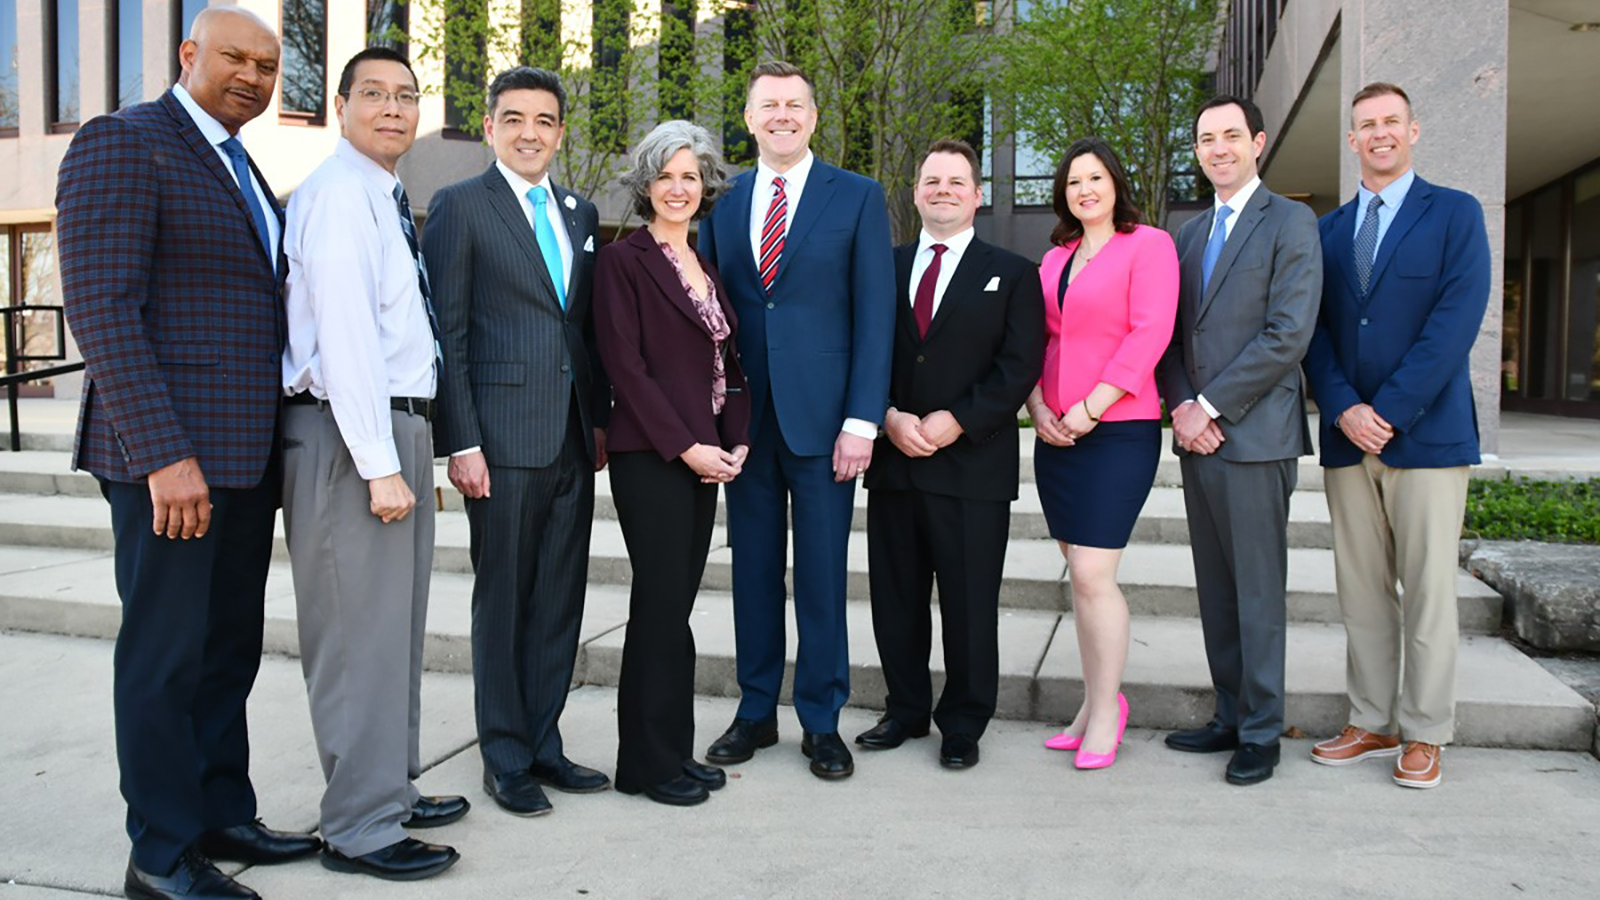 Mayor Scott Wehrli and eight Naperville City Council members stand together before the Municipal Center, along the riverwalk